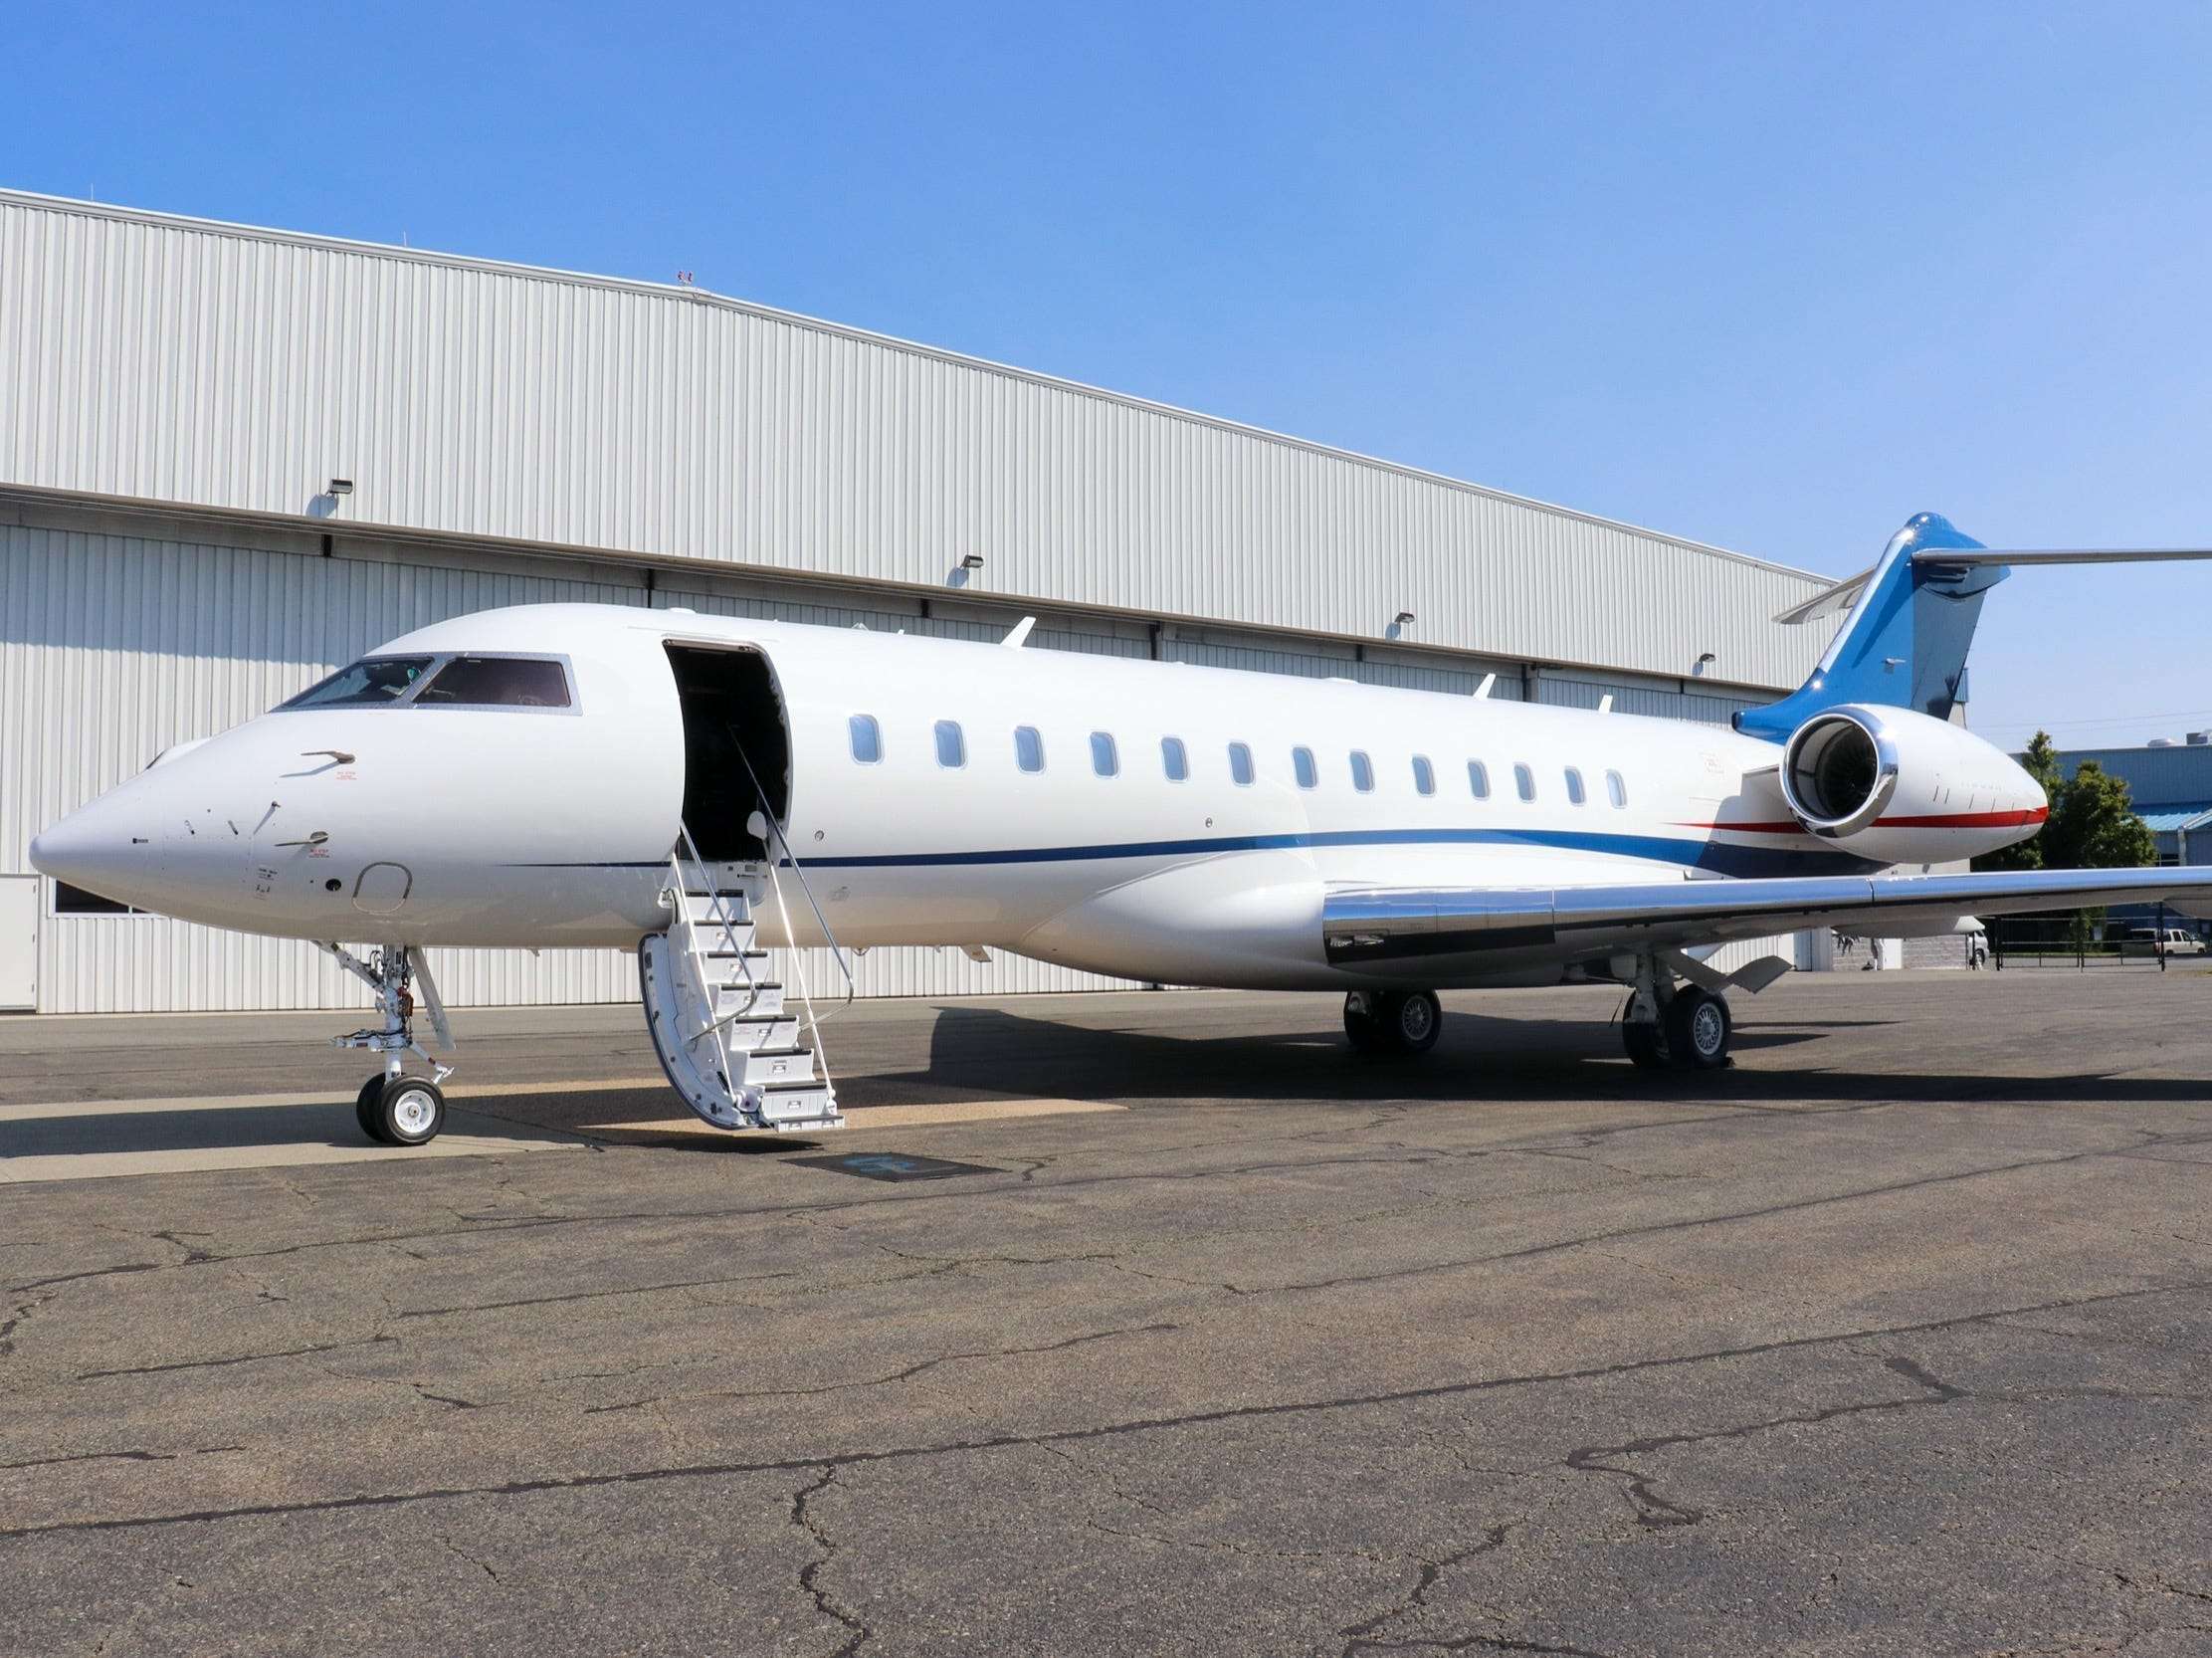 This brandnew 56 million Bombardier Global 6500 private jet can fly